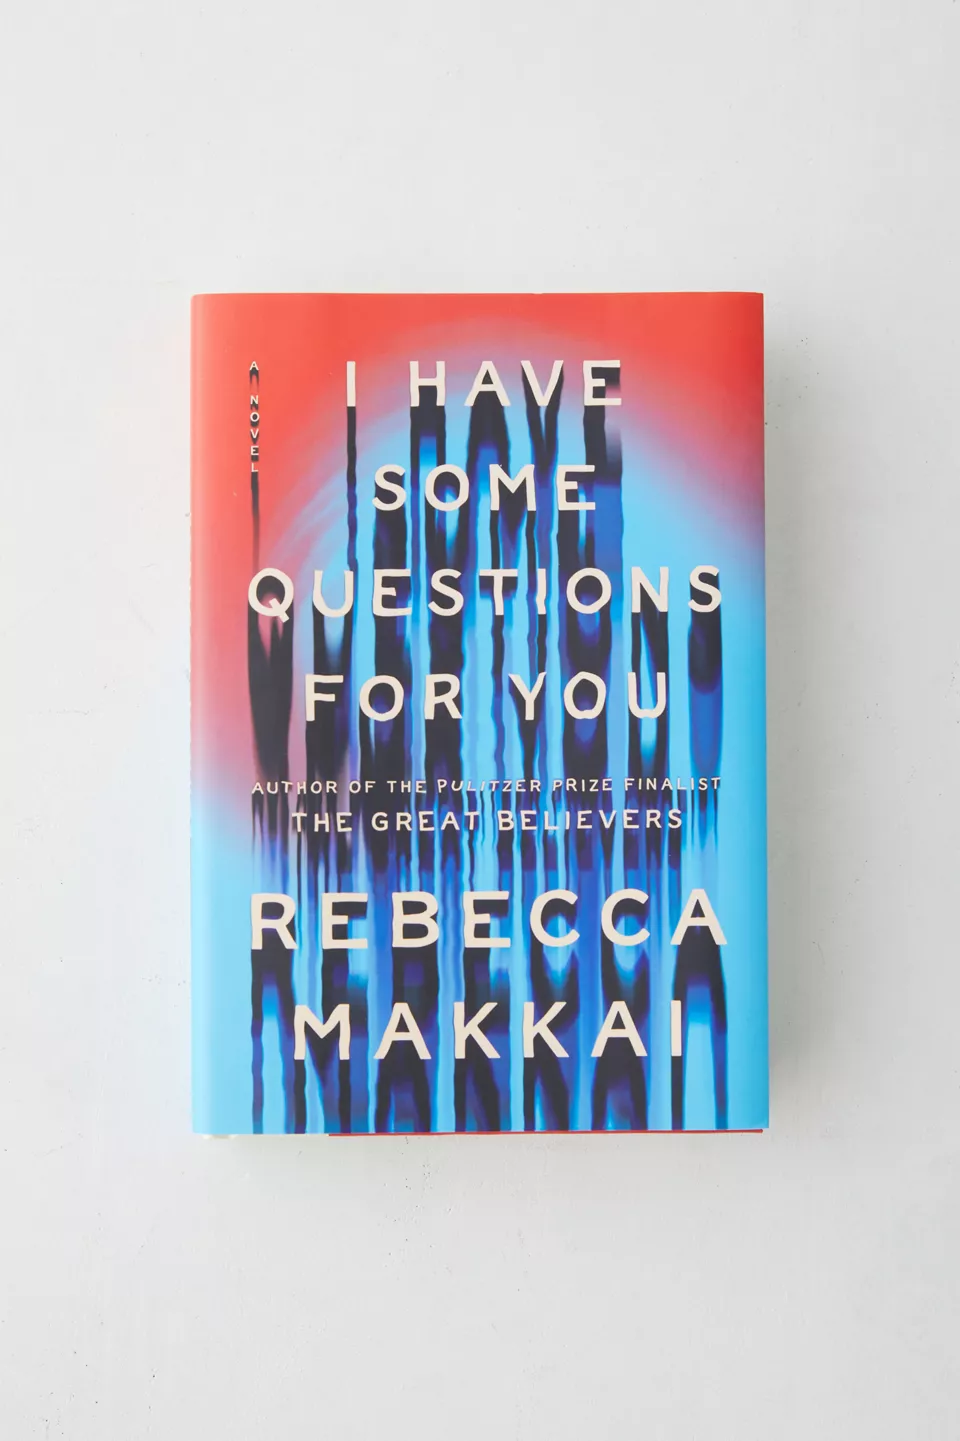 urbanoutfitters.com | I Have Some Questions For You: A Novel By Rebecca Makkai